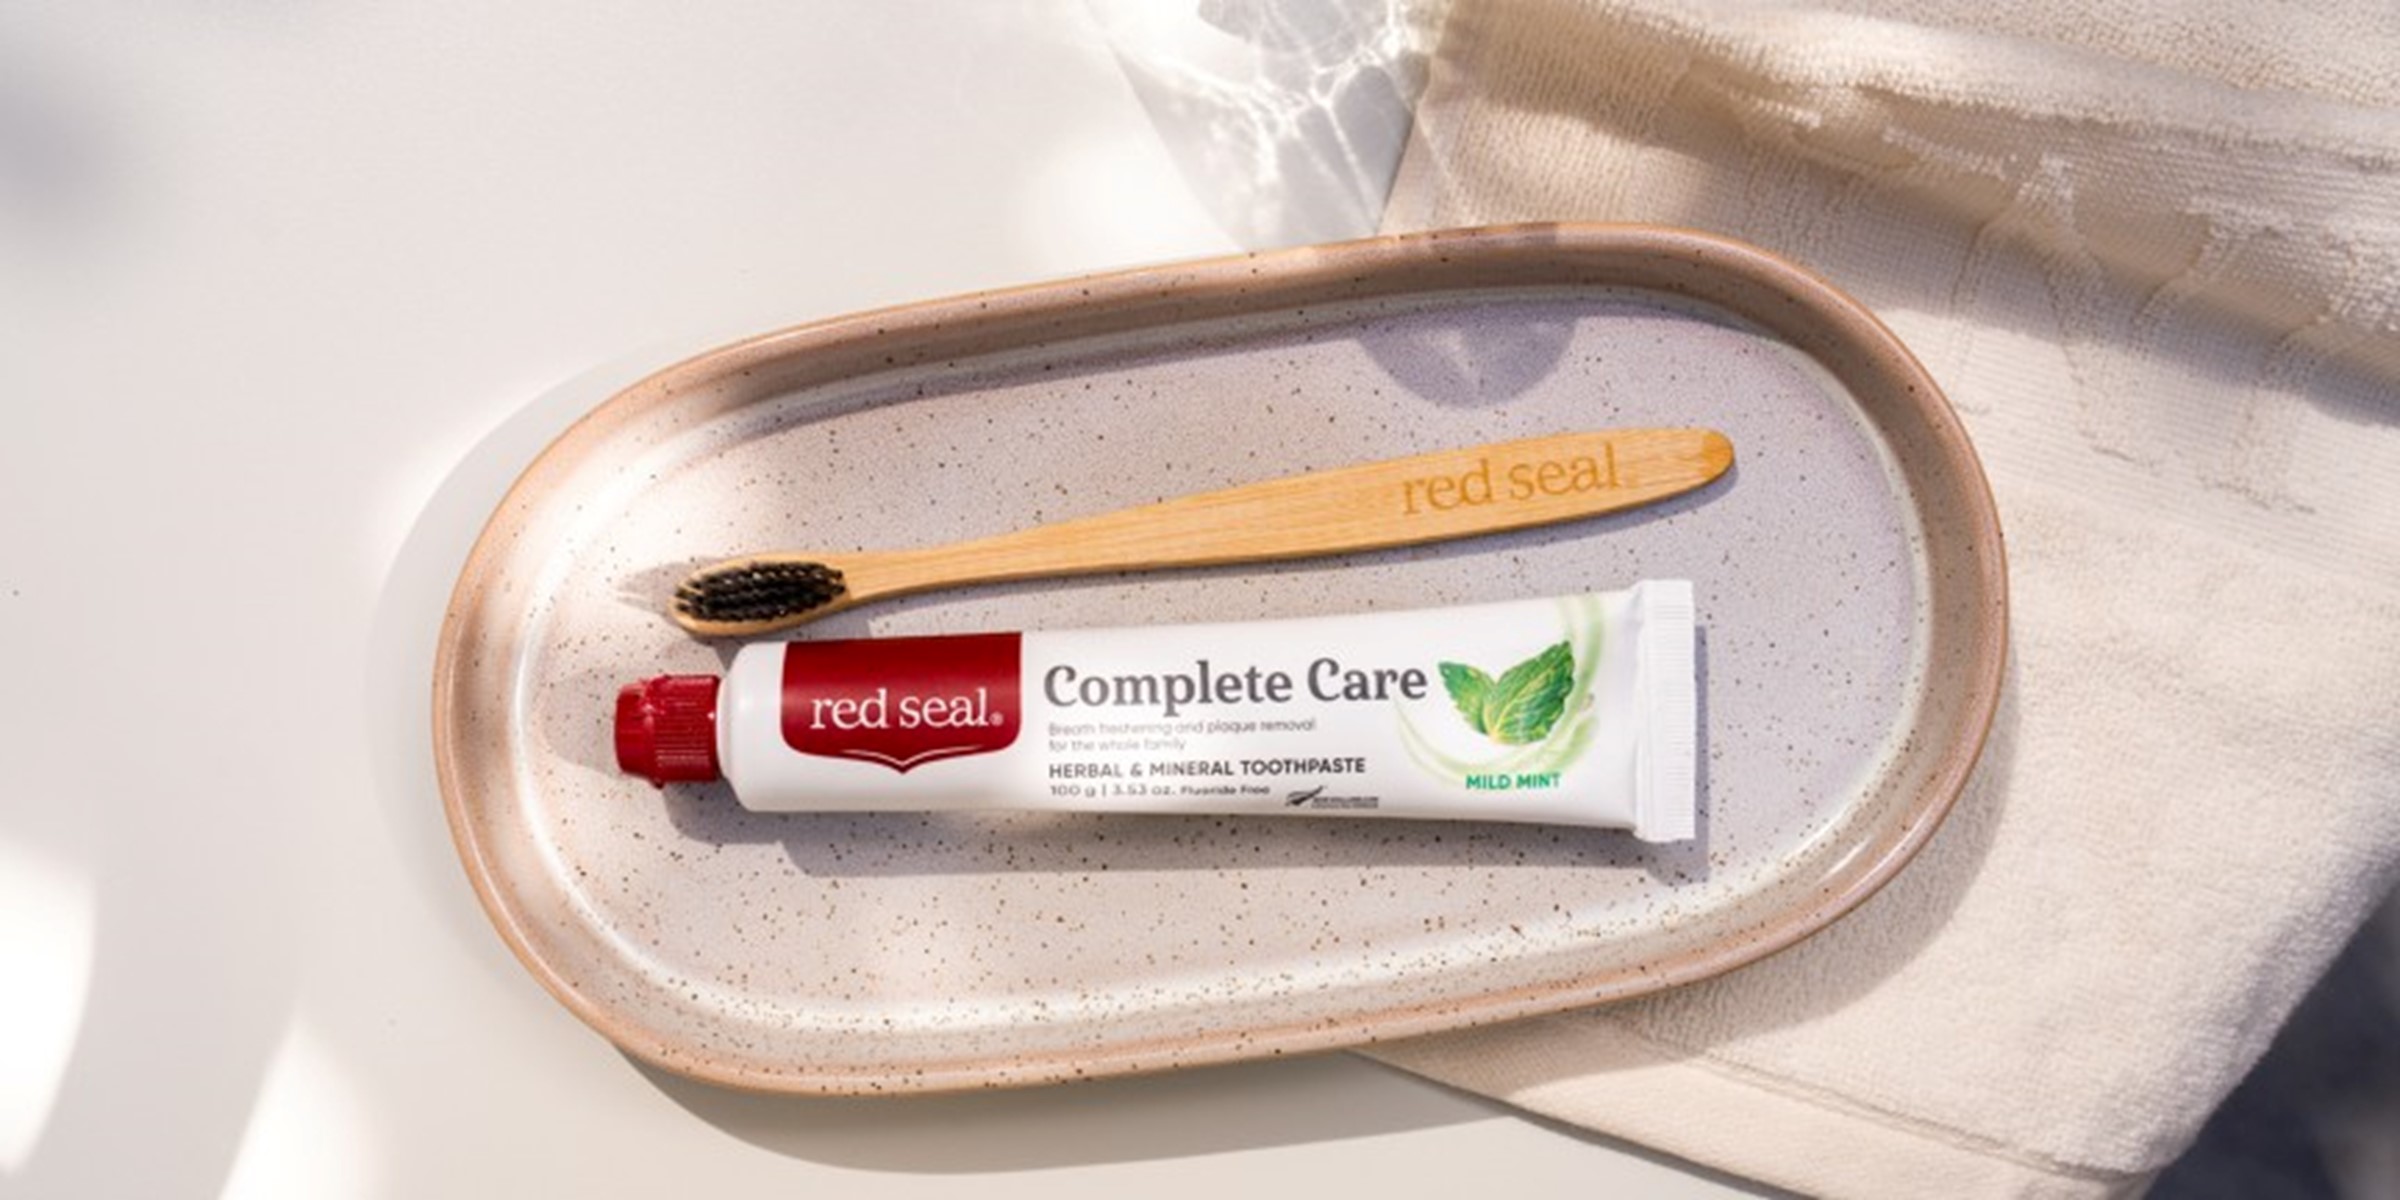 Red Seal Complete Care Sub Category